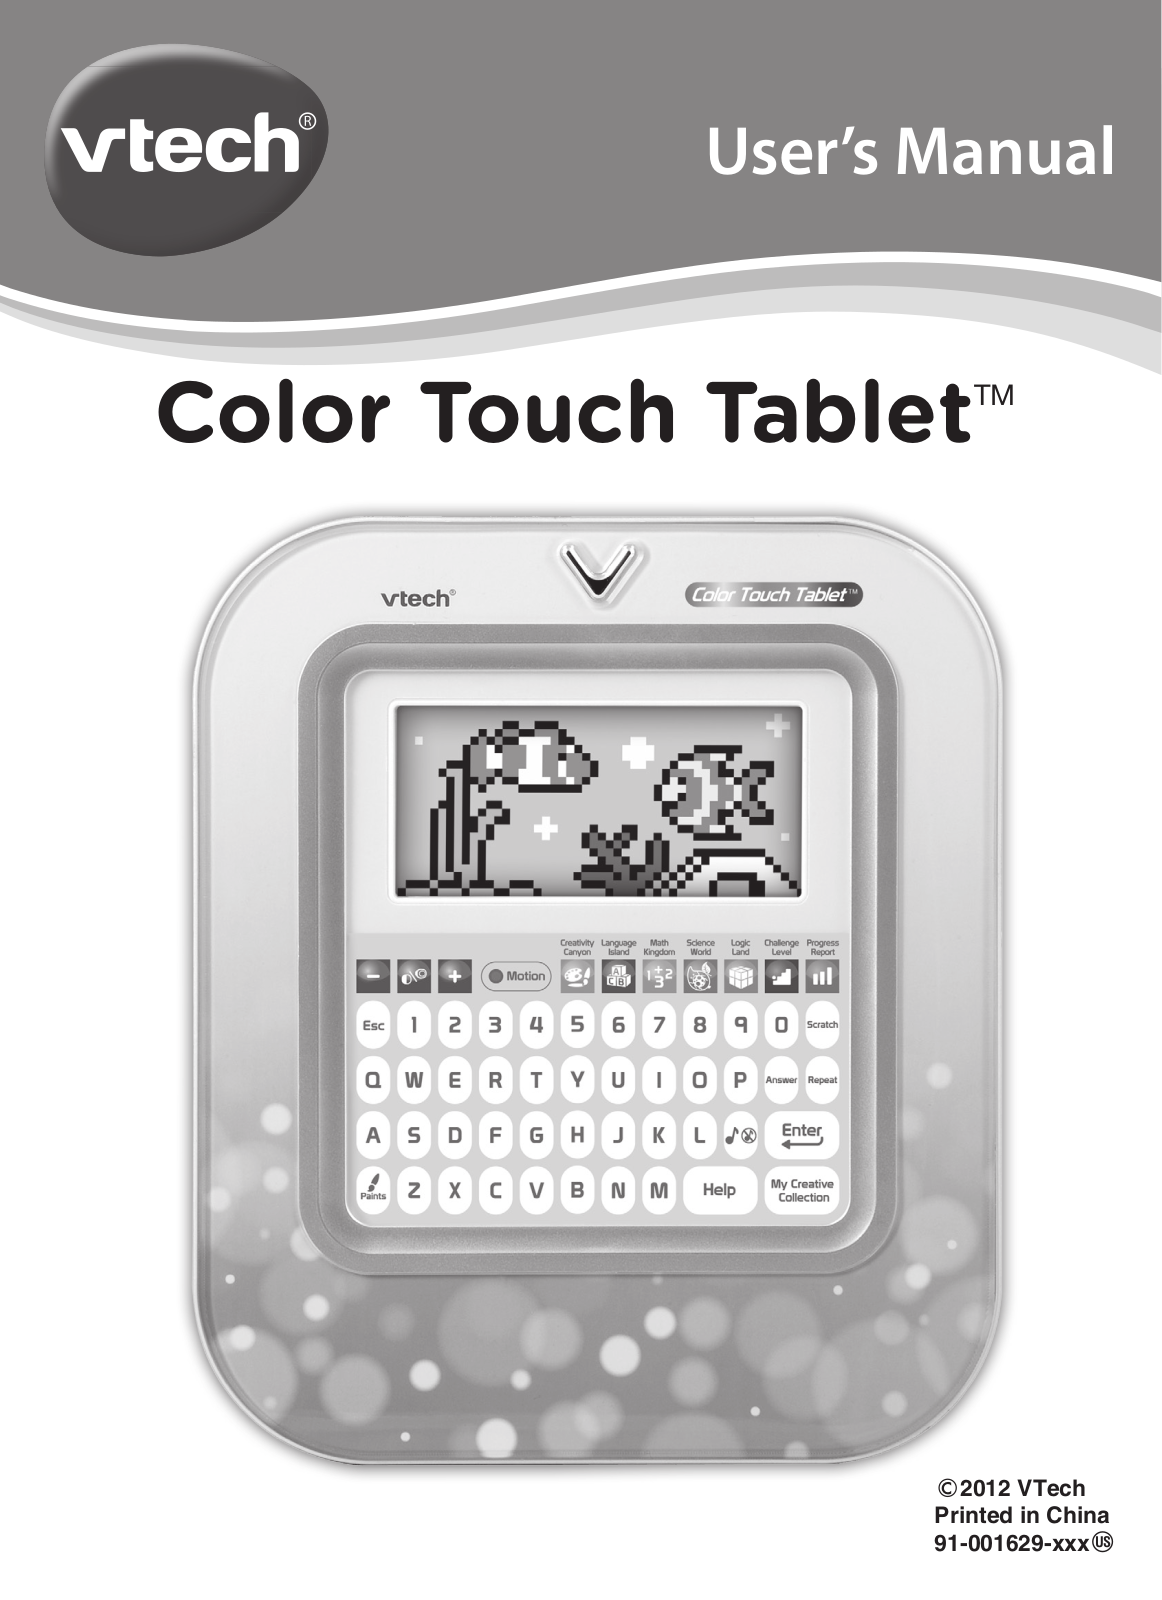 VTech Brilliant Creations Color Touch Tablet Owner's Manual